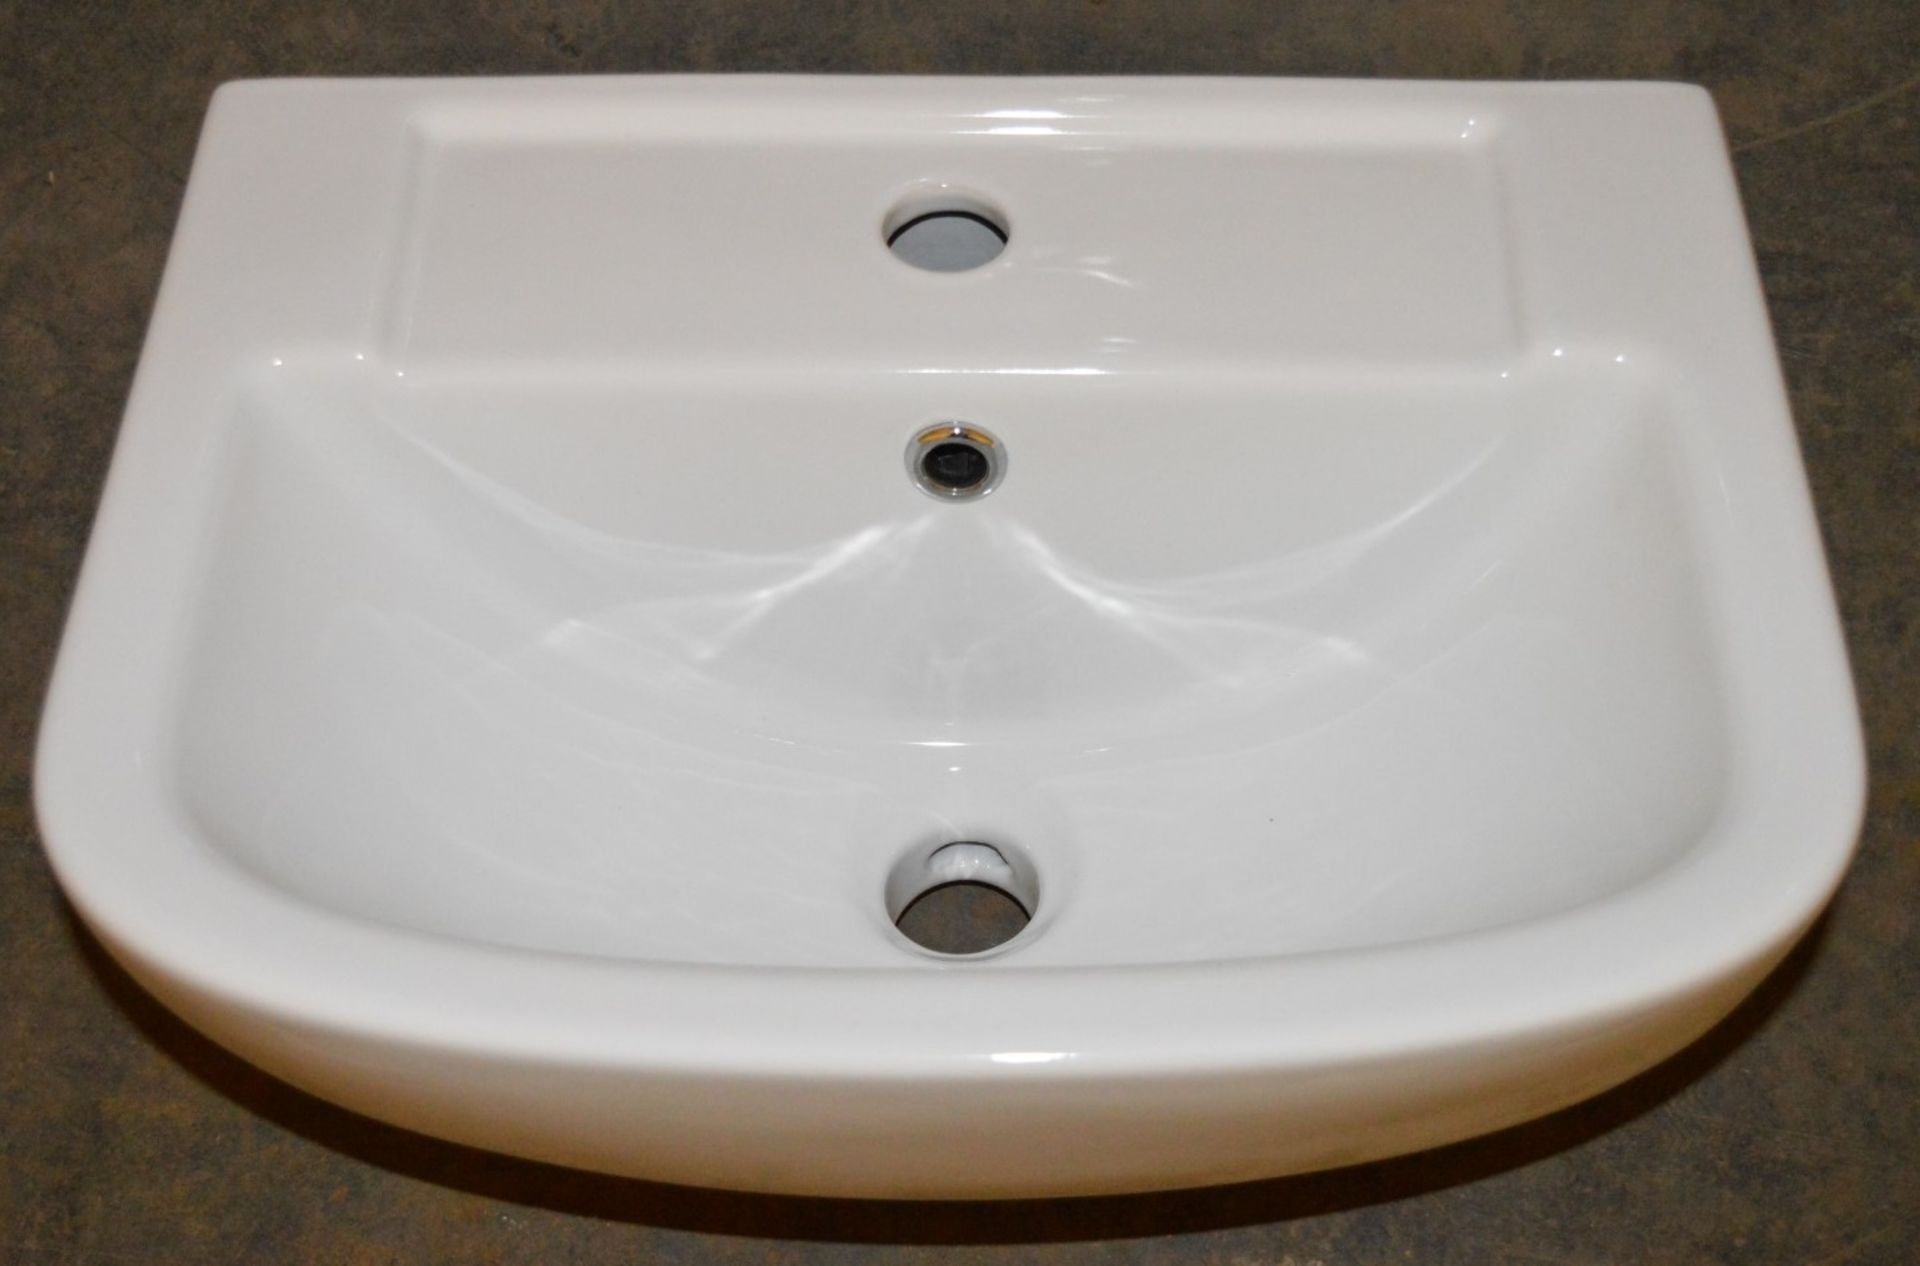 20 x Vogue Bathrooms ZERO Single Tap Hole WALL HUNG SINK BASINS - 450mm Width - Brand New Boxed